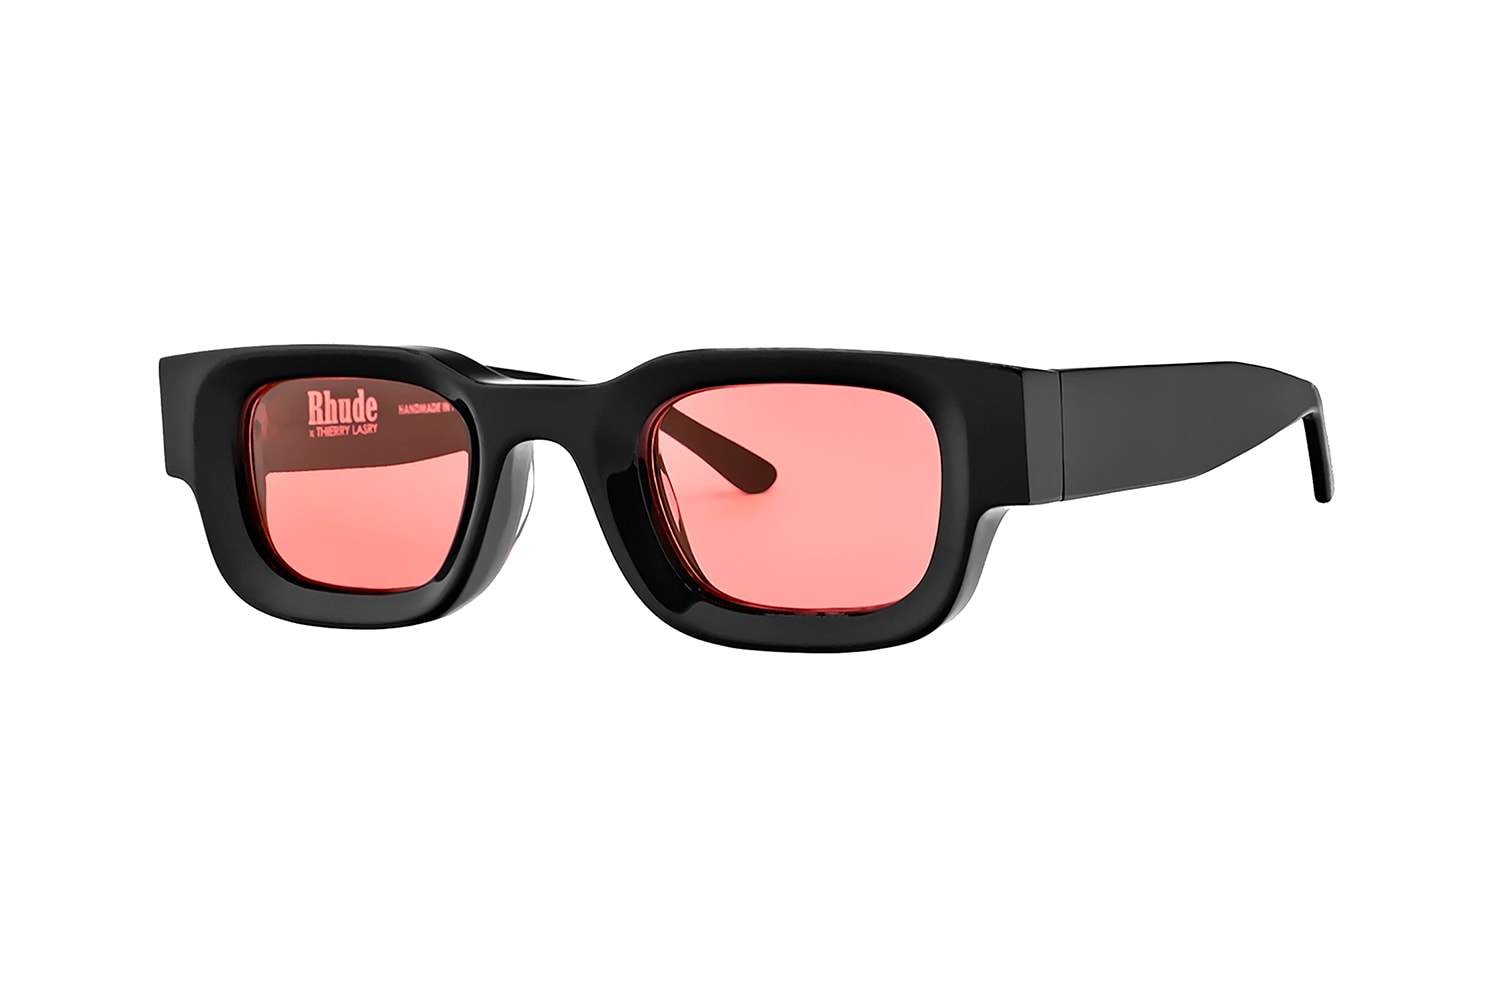 RHUDE Thierry Lasry RHEVISION Collection Release Info Date Buy Price